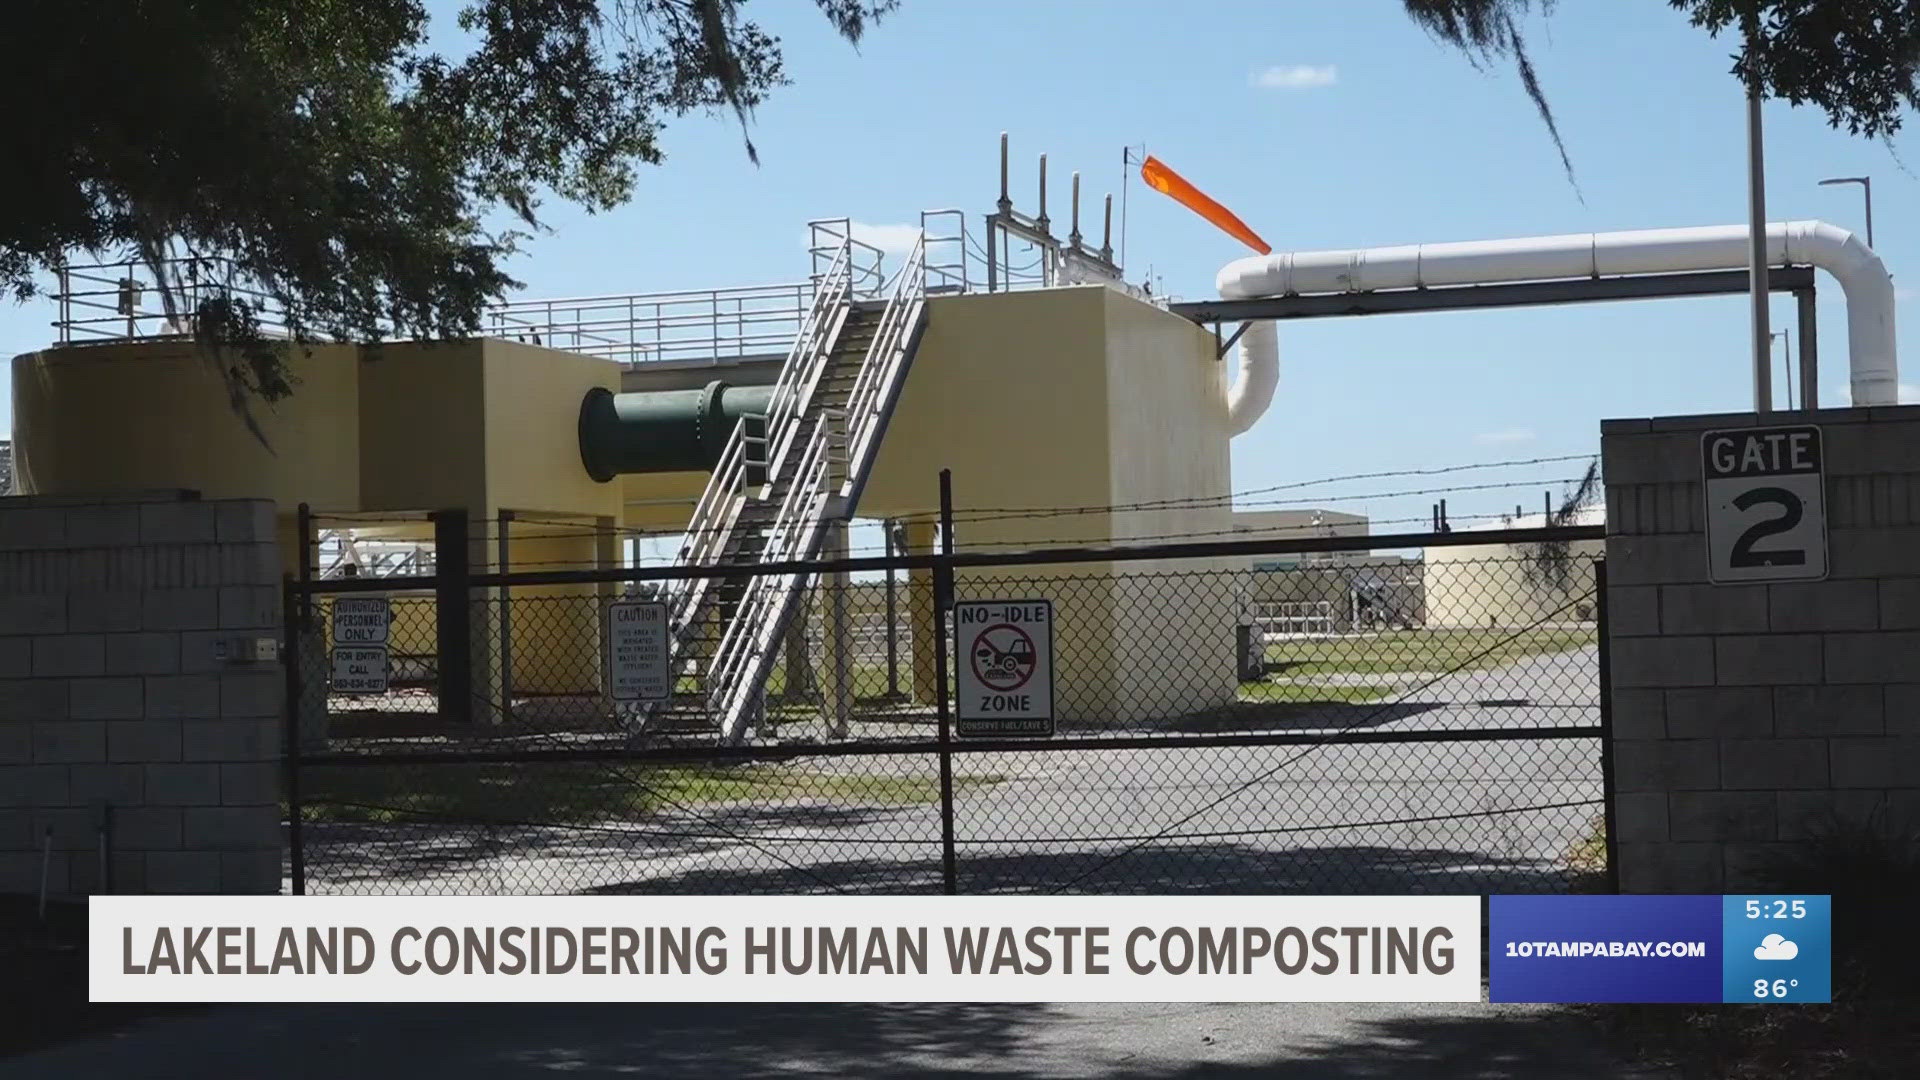 The six-month study will consider whether it's worth it for Lakeland to build a $20 million composting plant.